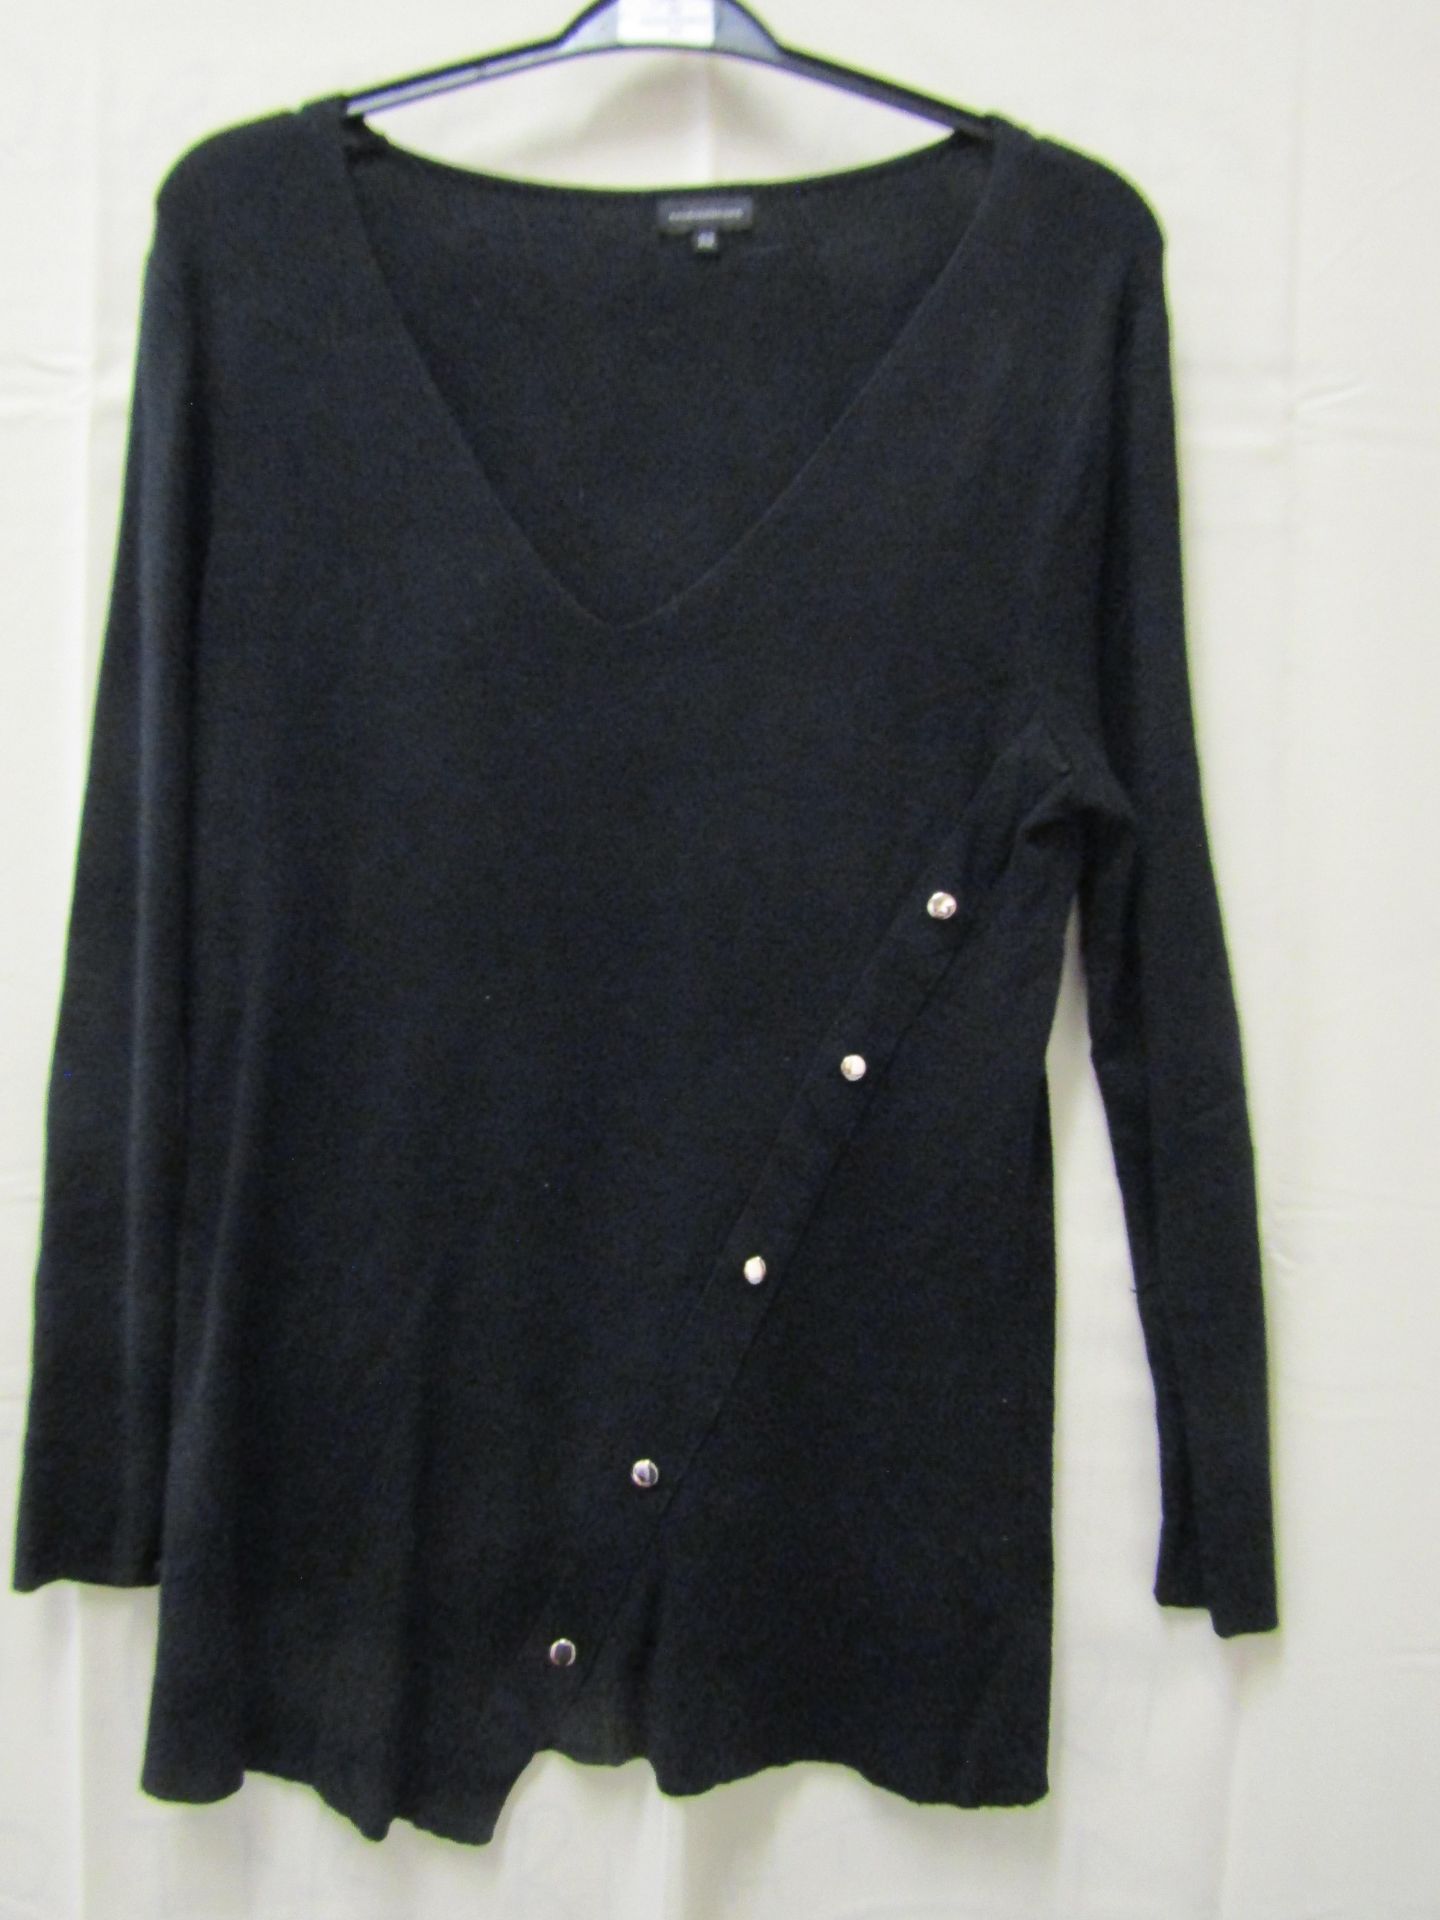 Kaleidoscope Long Jumper Black With Gold Coloured Studs Size 12 ( May Have Been Worn Good